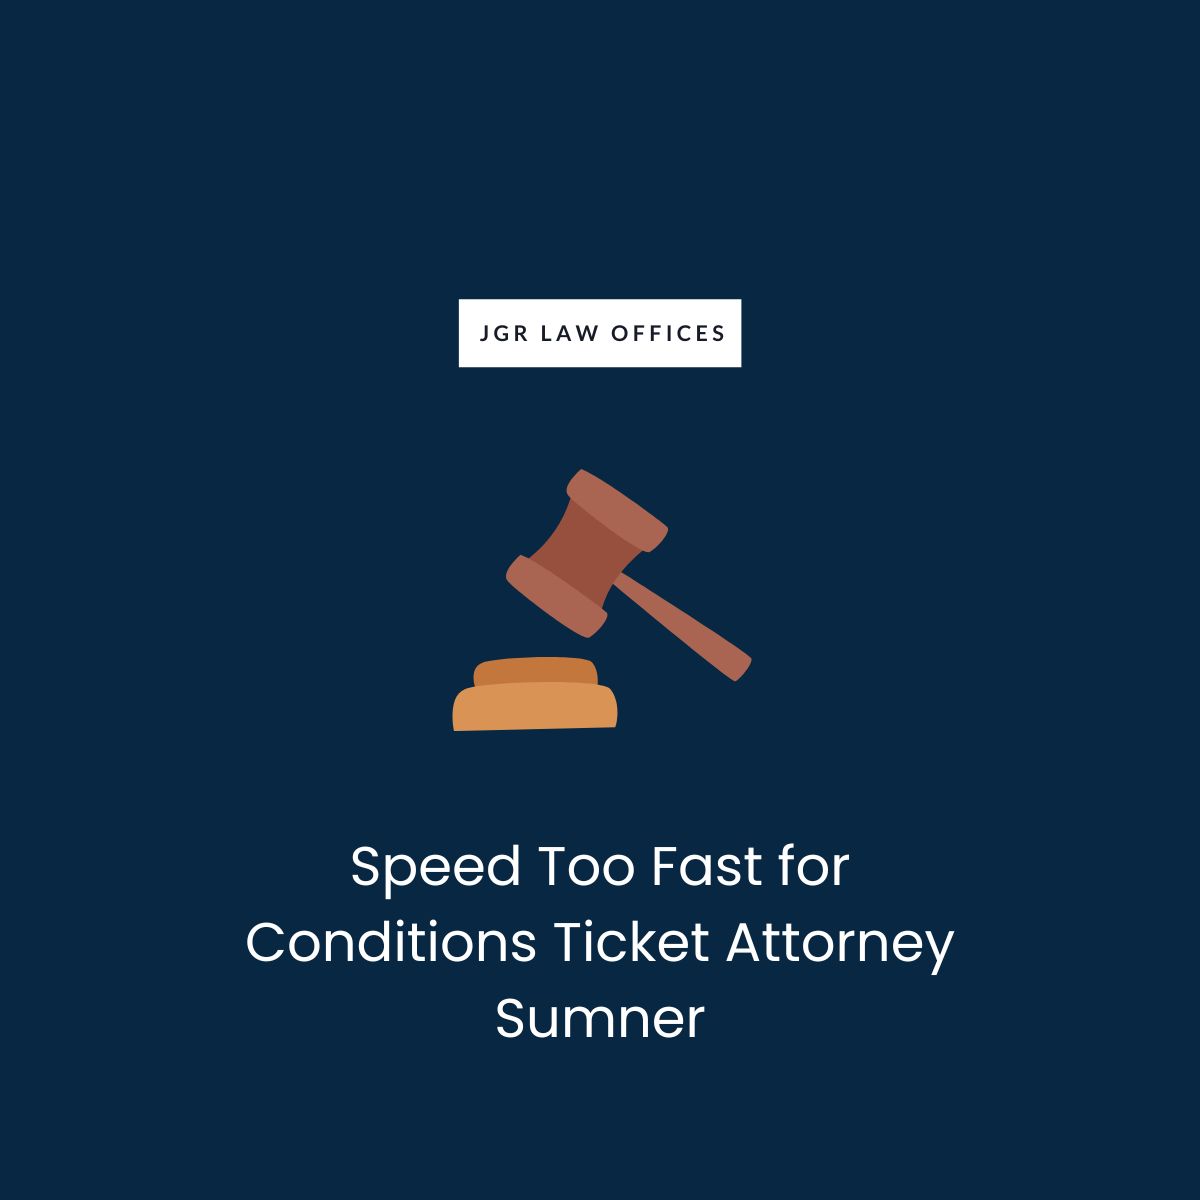 Speed Too Fast for Conditions Ticket Attorney Sumner